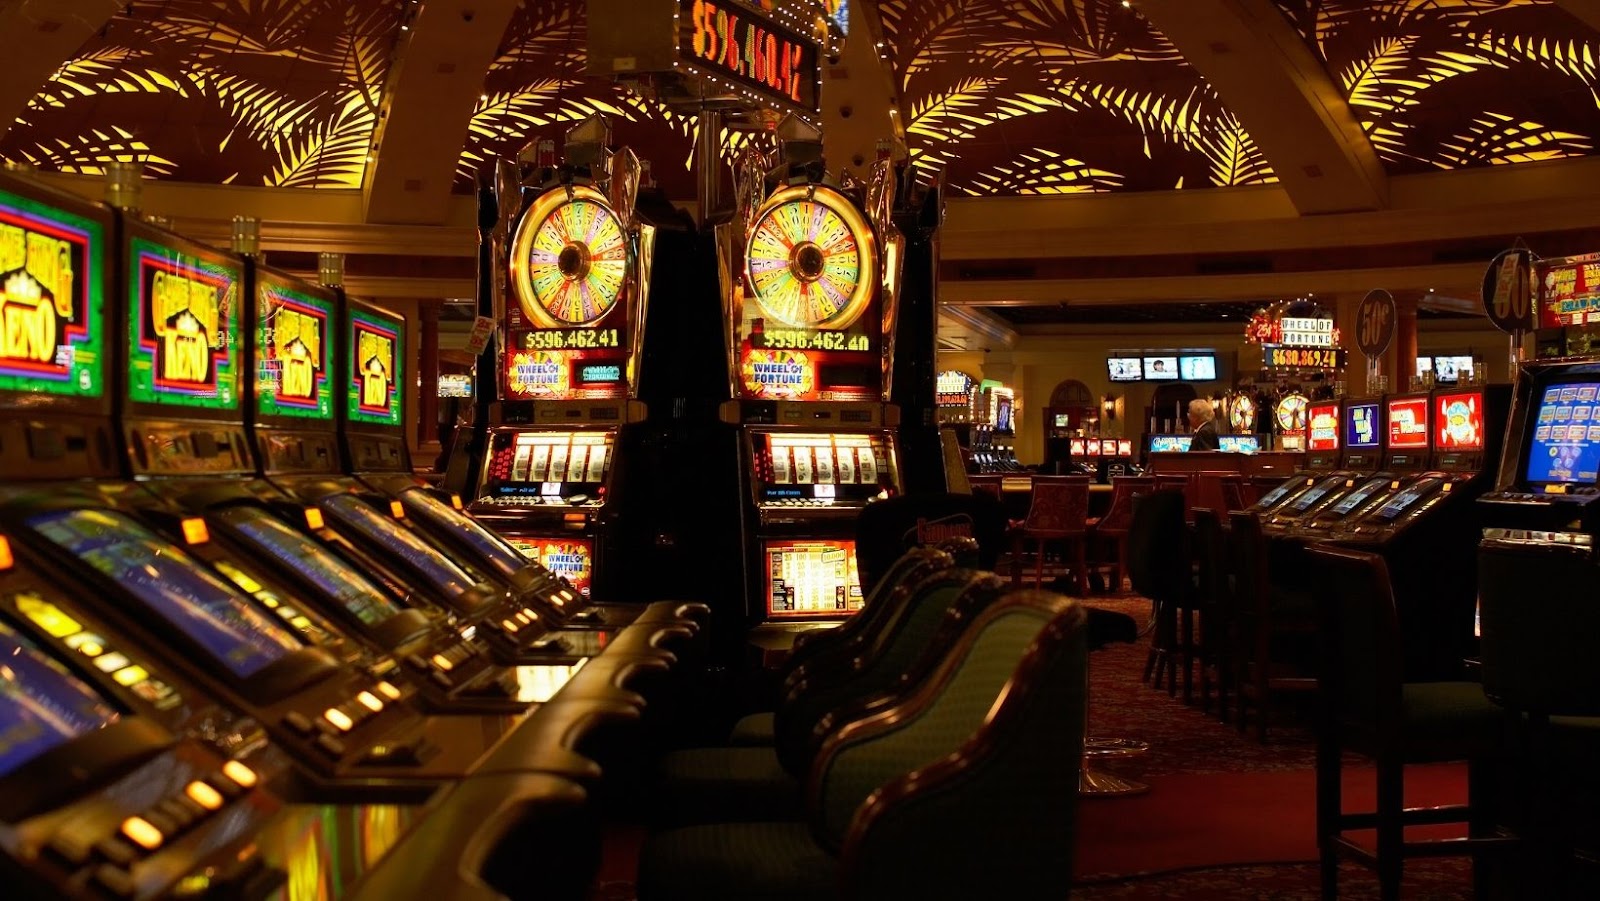 The Similarities Between Video Games And Casino Games